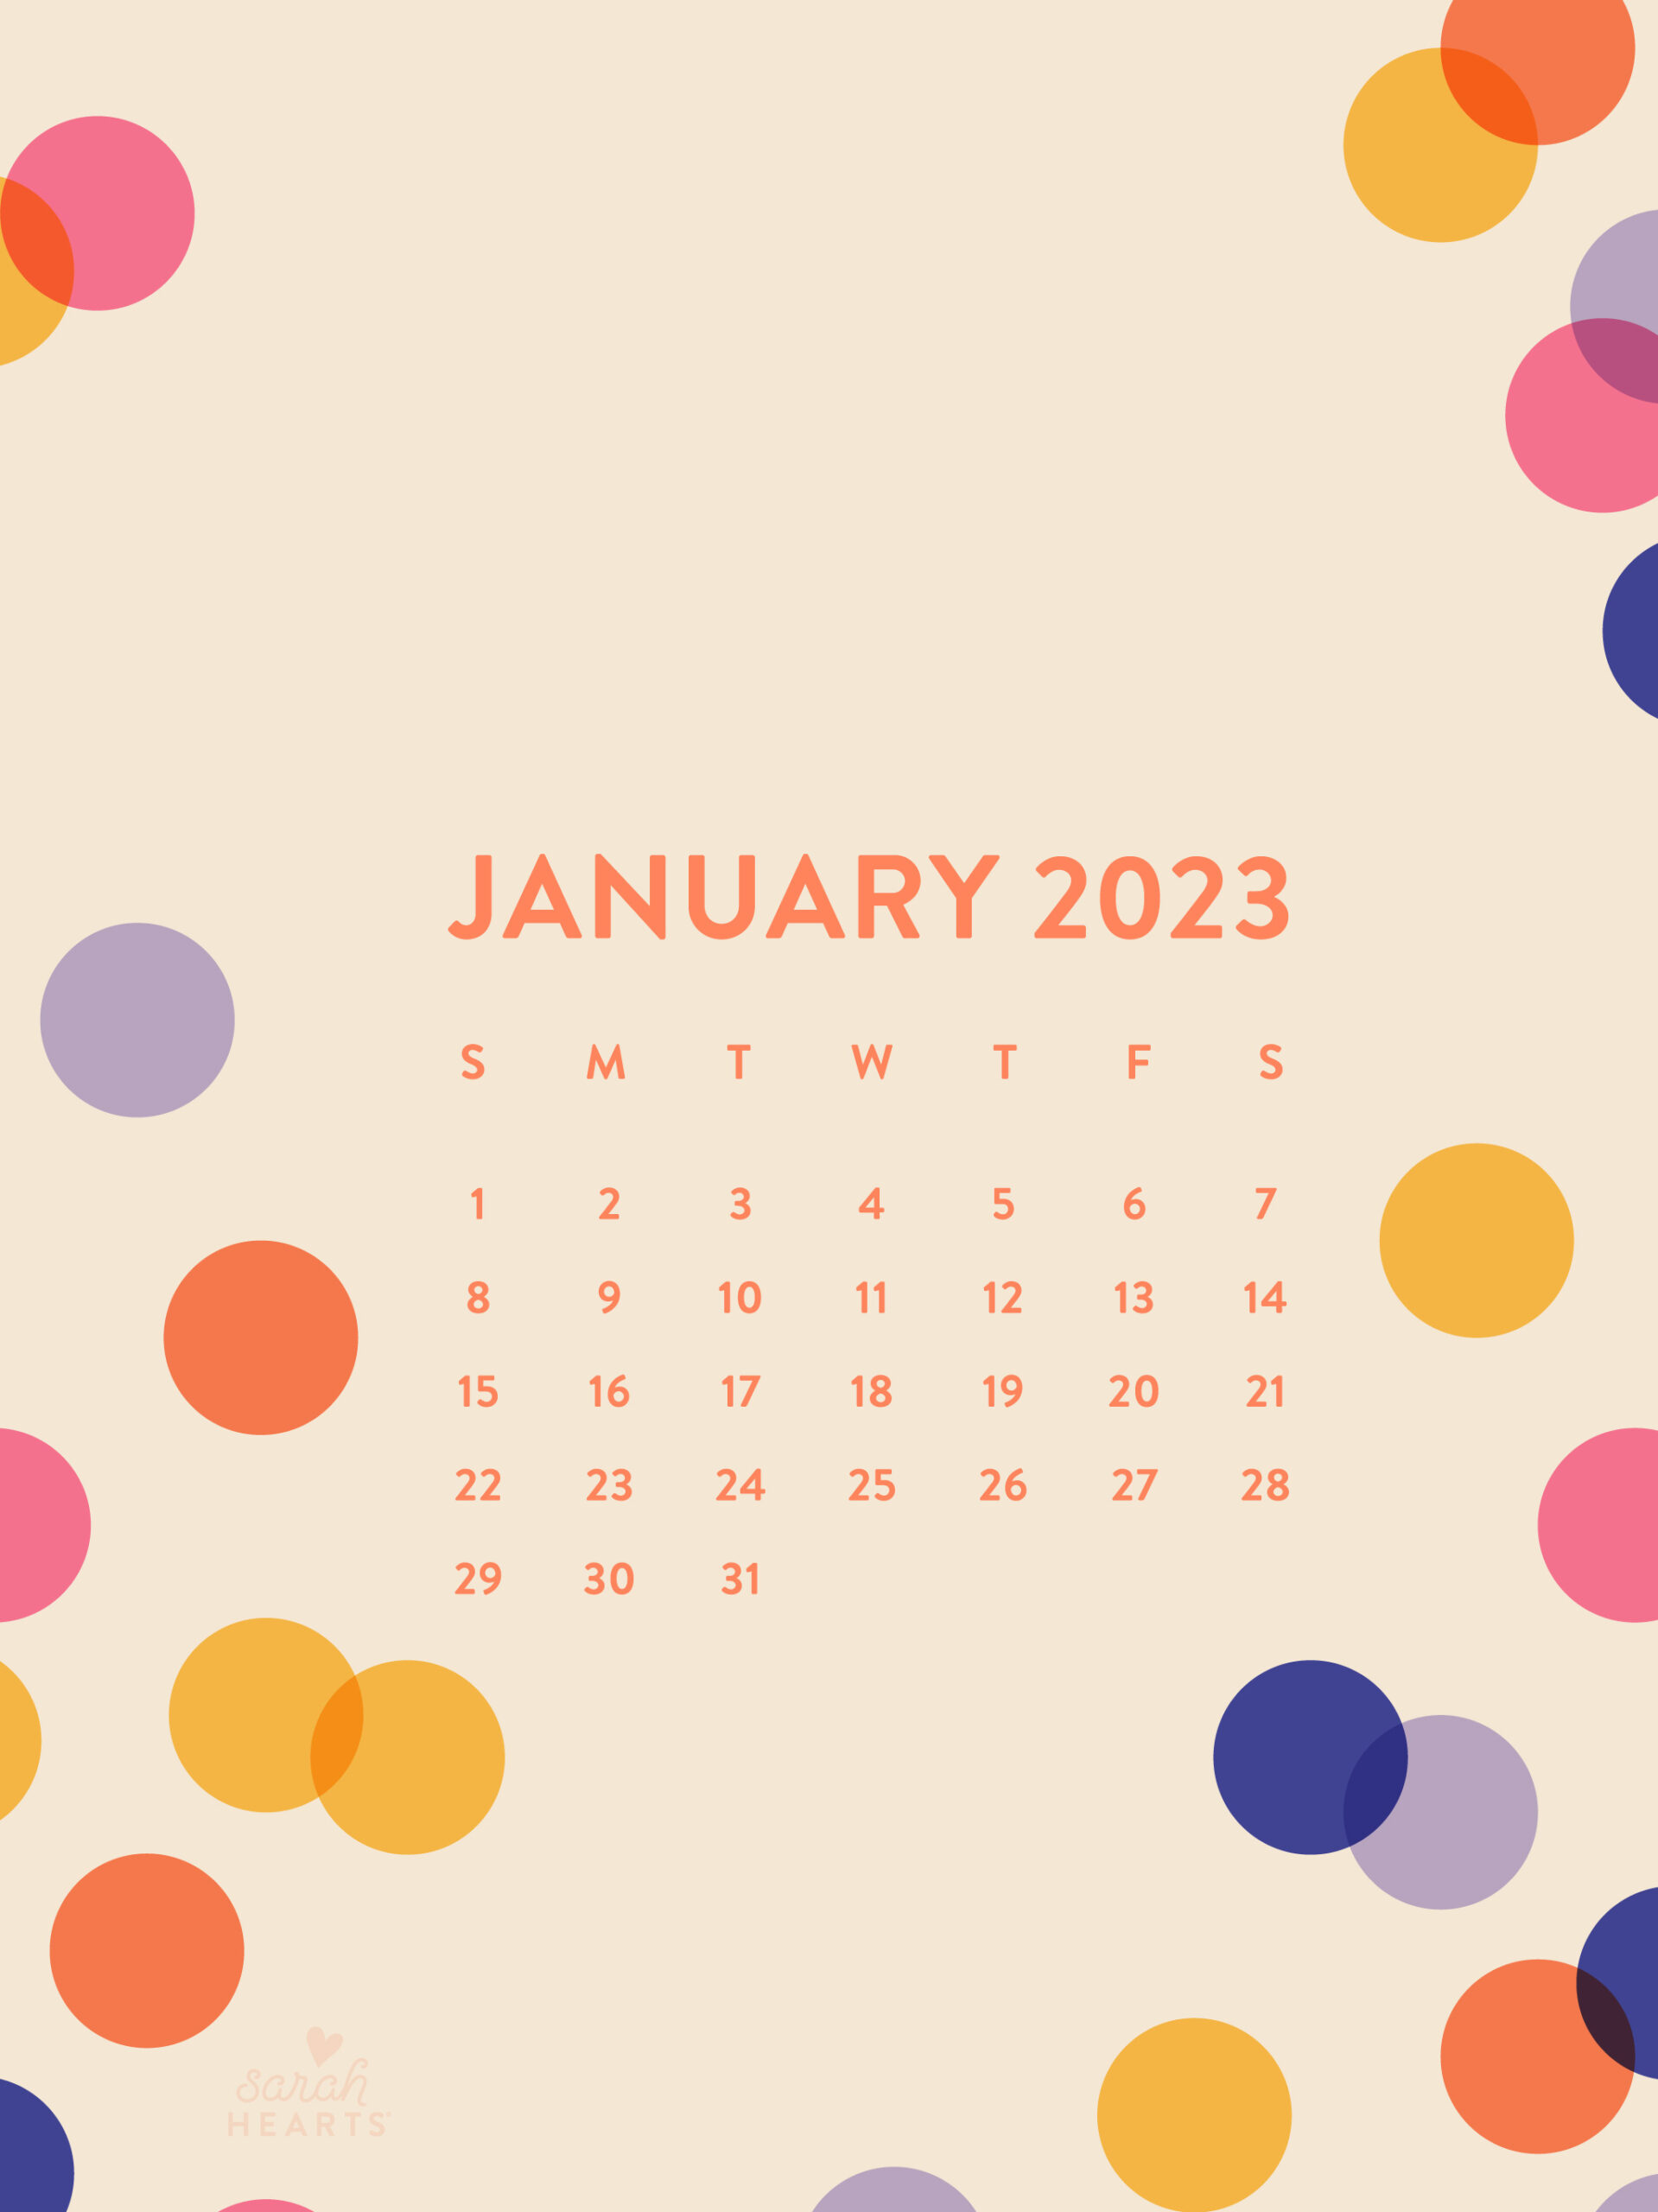 The January 2023 Monthly Desk Calendar For 2023 Year On Yellow Background  Stock Photo  Download Image Now  iStock